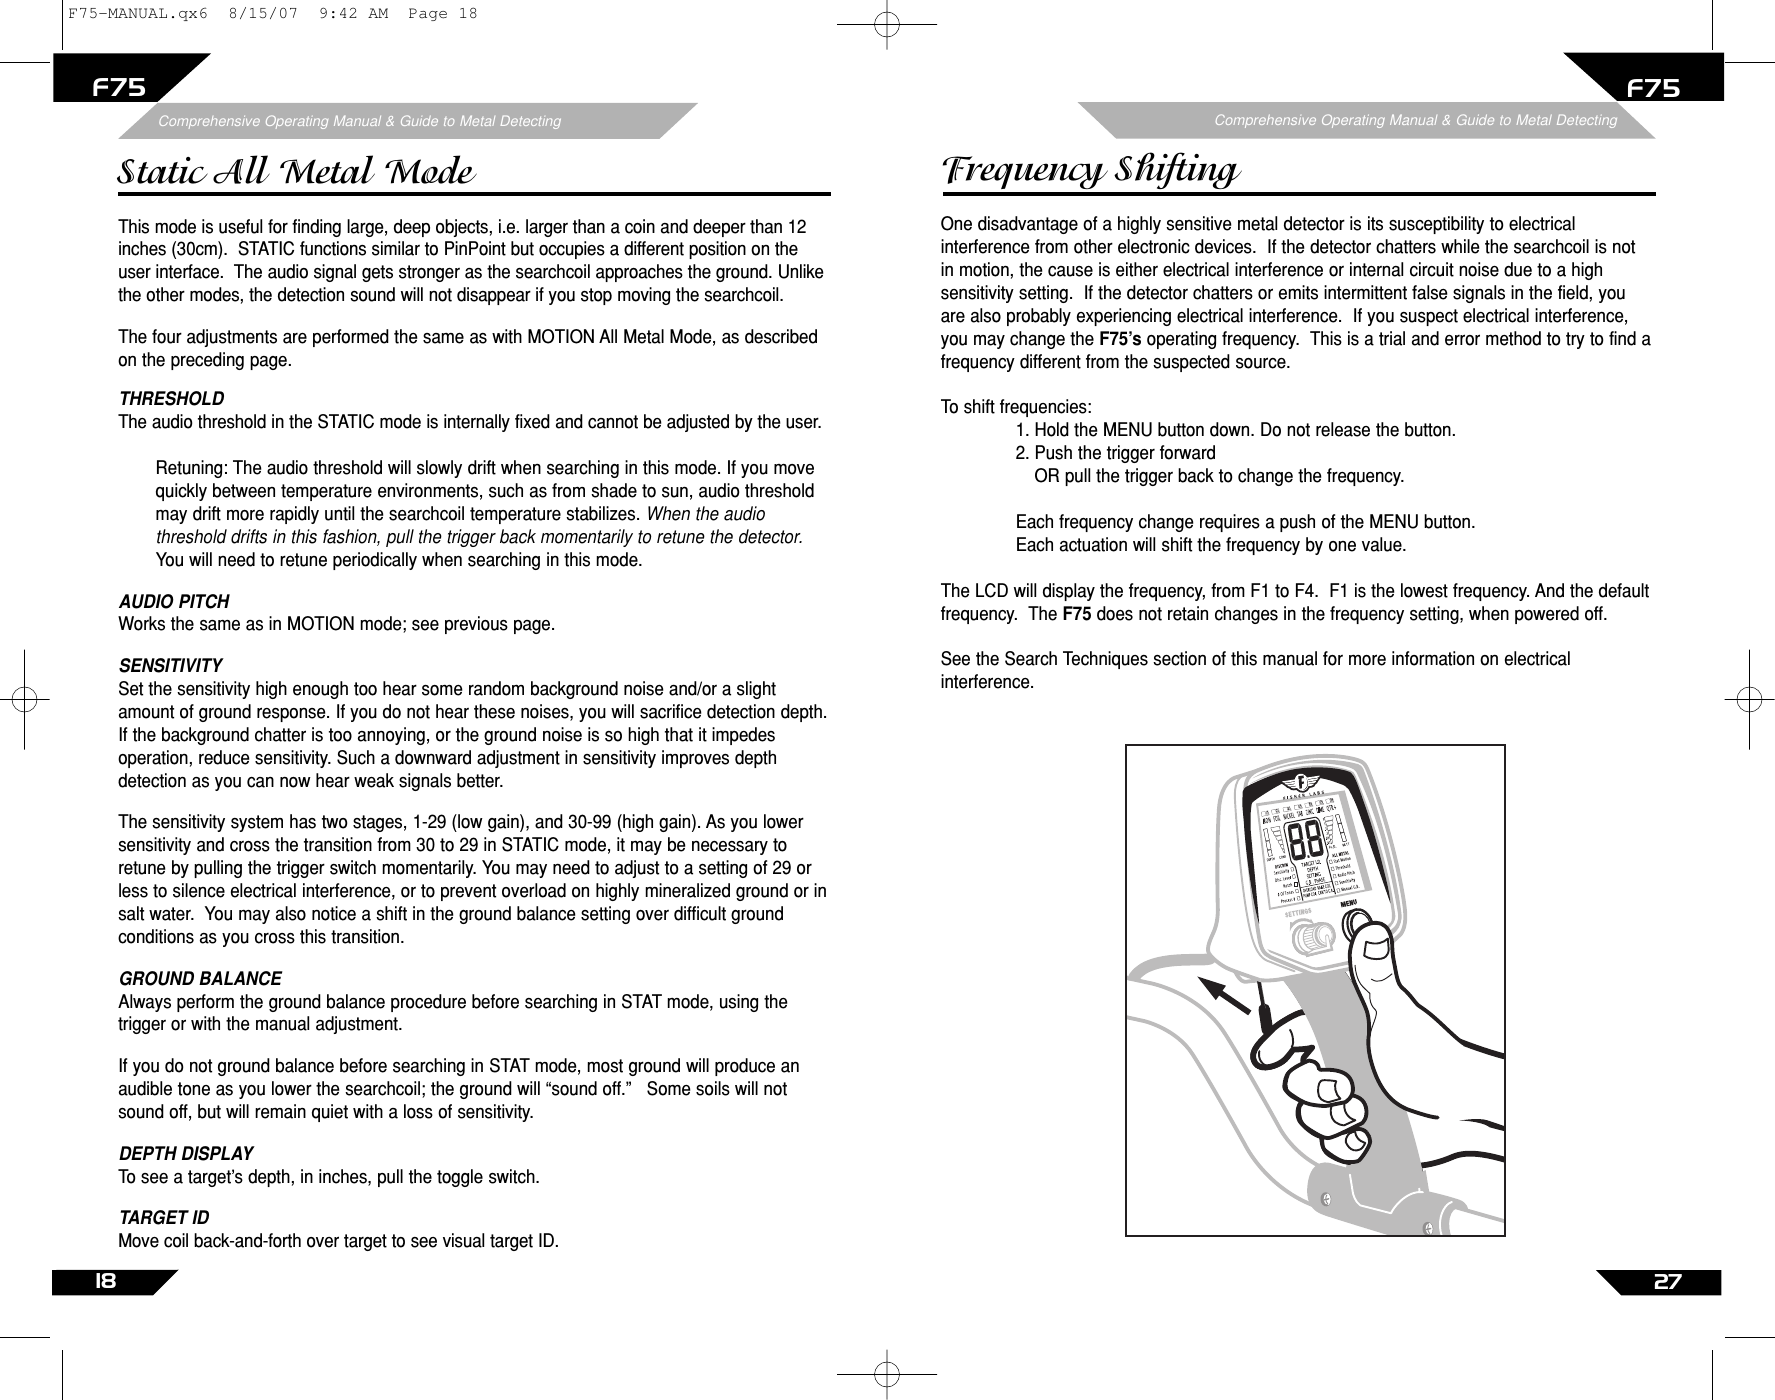 Page 27 of First Texas F75MD Hobby Metal Detector User Manual Layout 1